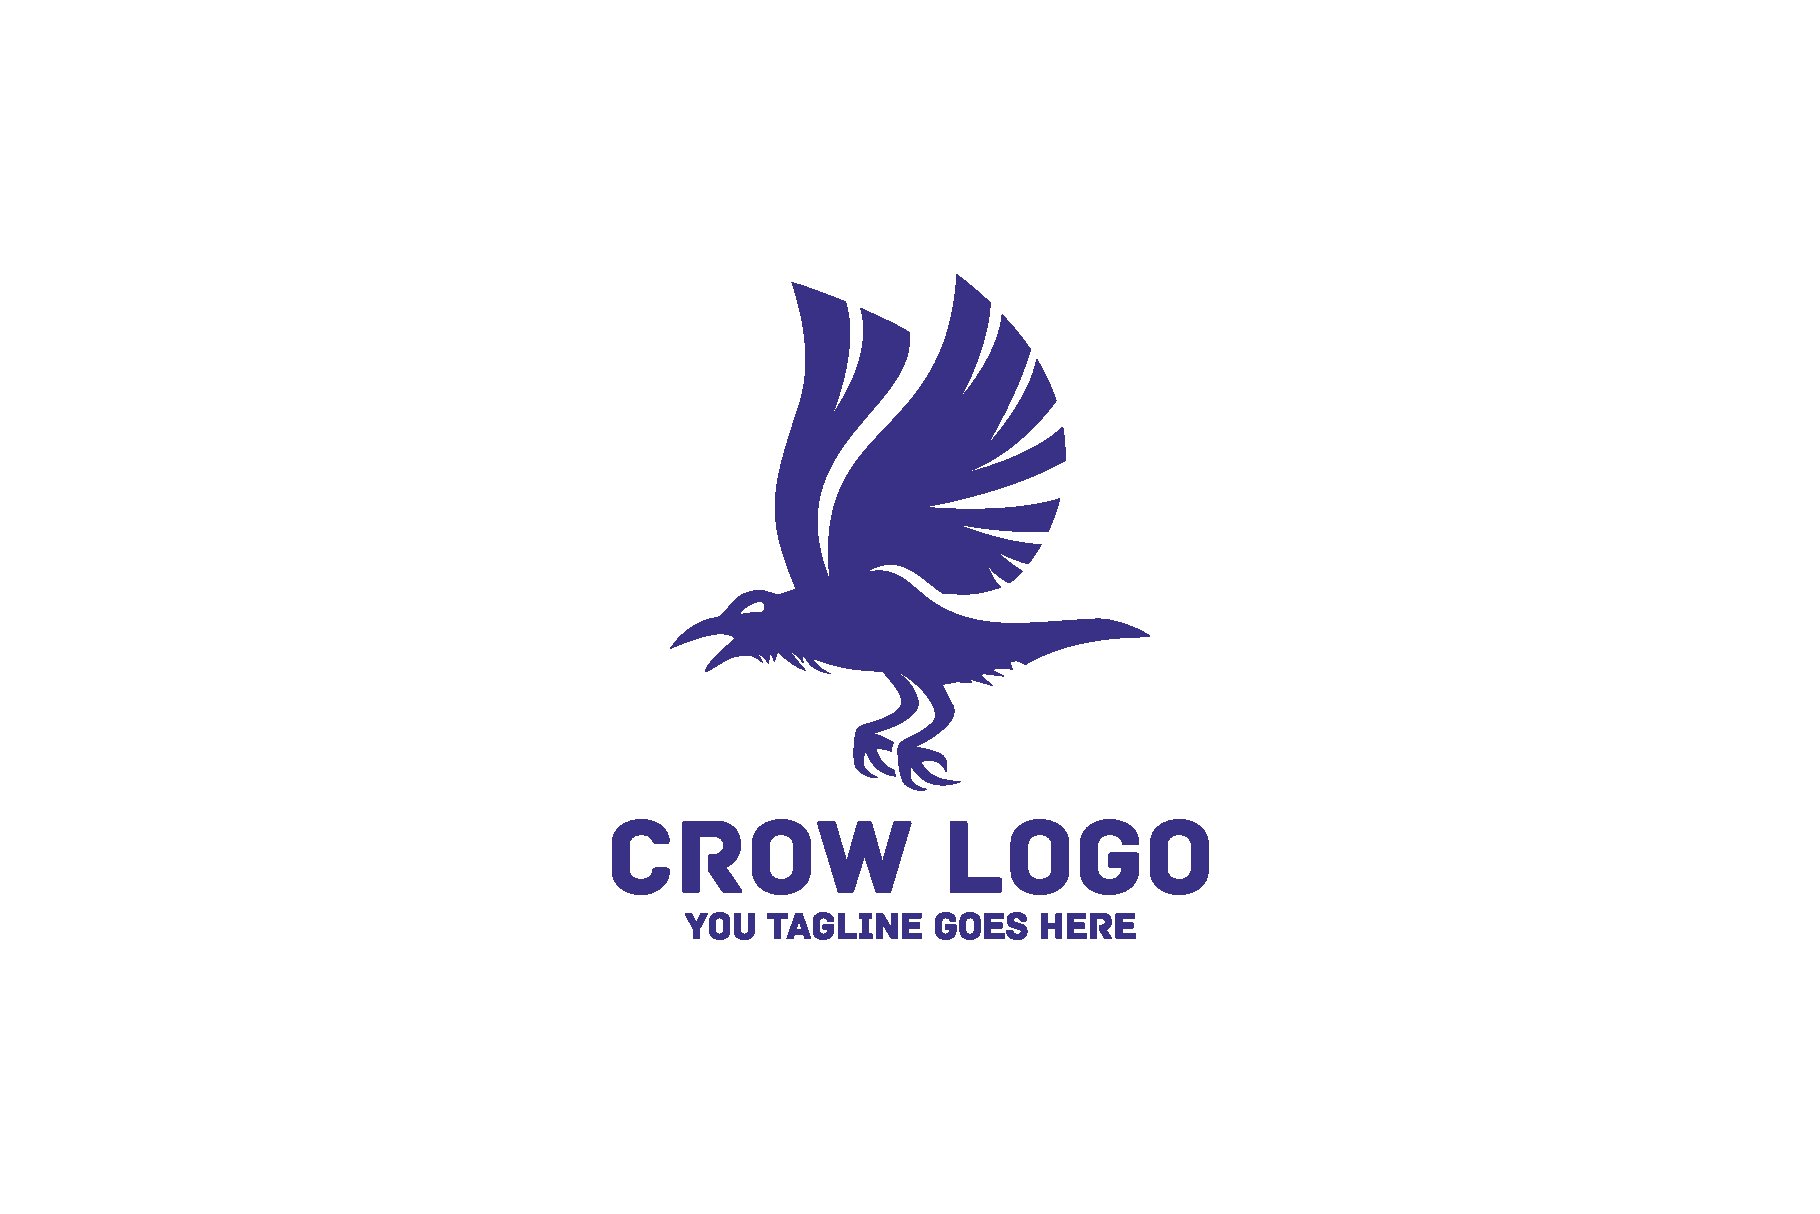 Create a professional crow logo with our logo maker in under 5 minutes